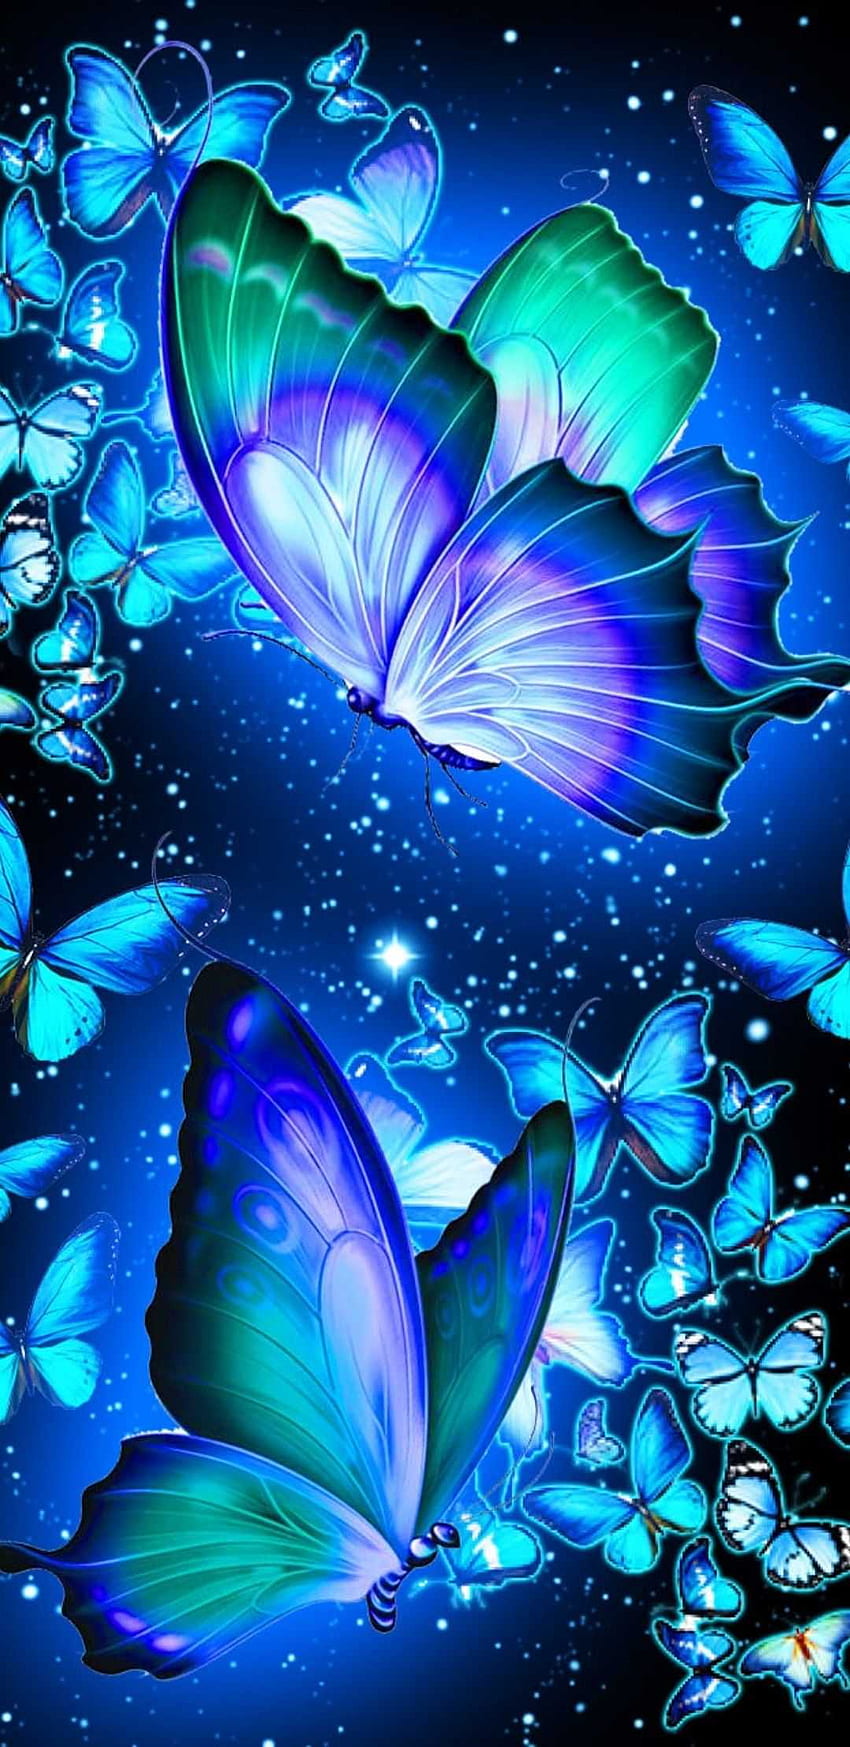 Butterfly - Awesome HD phone wallpaper